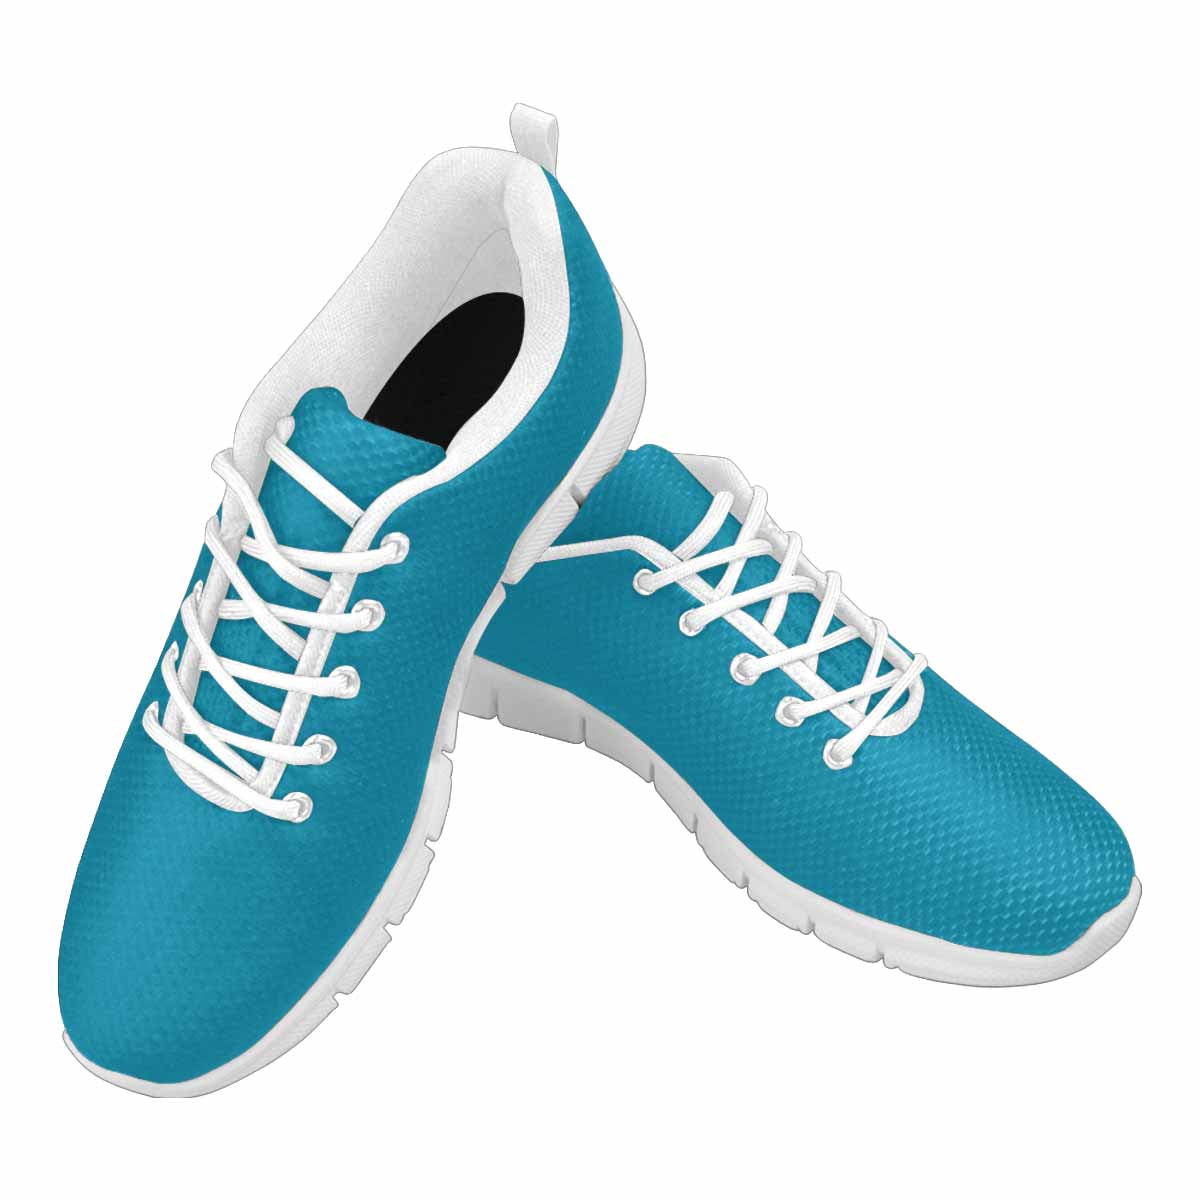 Sneakers For Men,    Blue Green   - Running Shoes